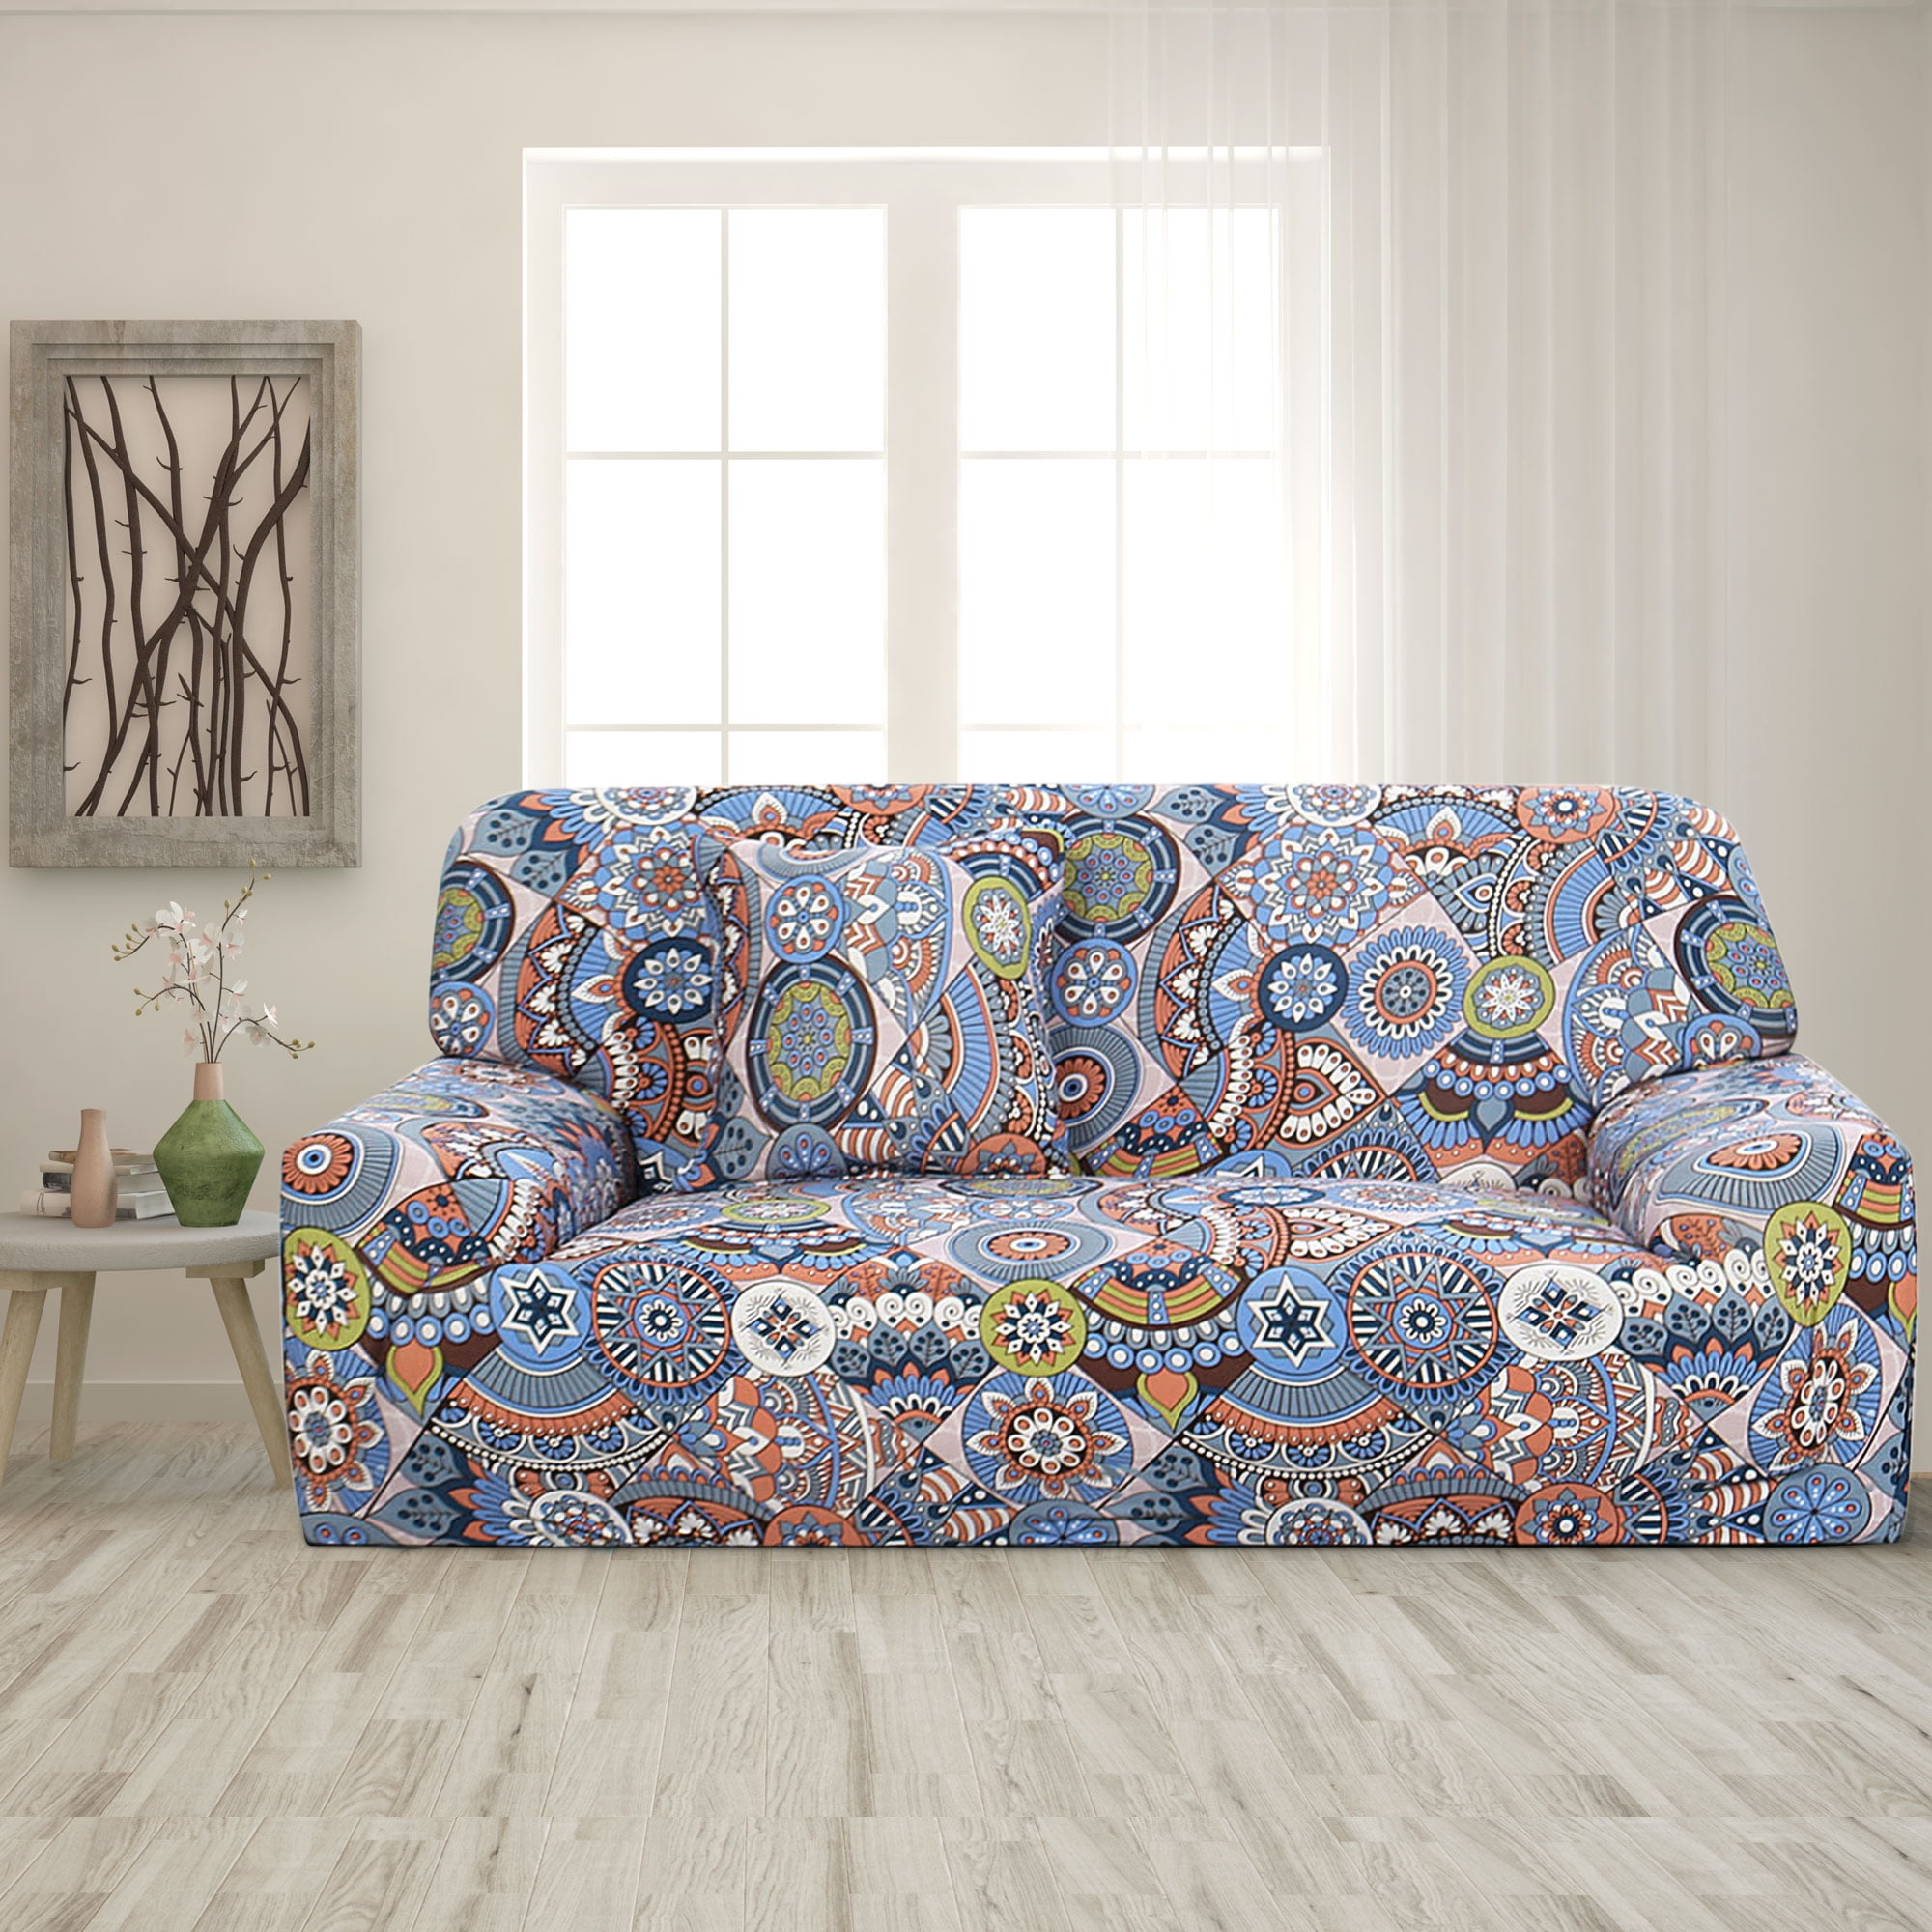 Details about   Floral Slipcover Stretch Elastic Sofa Covers Armchair Couch Cover 1/2/3/4 Seater 